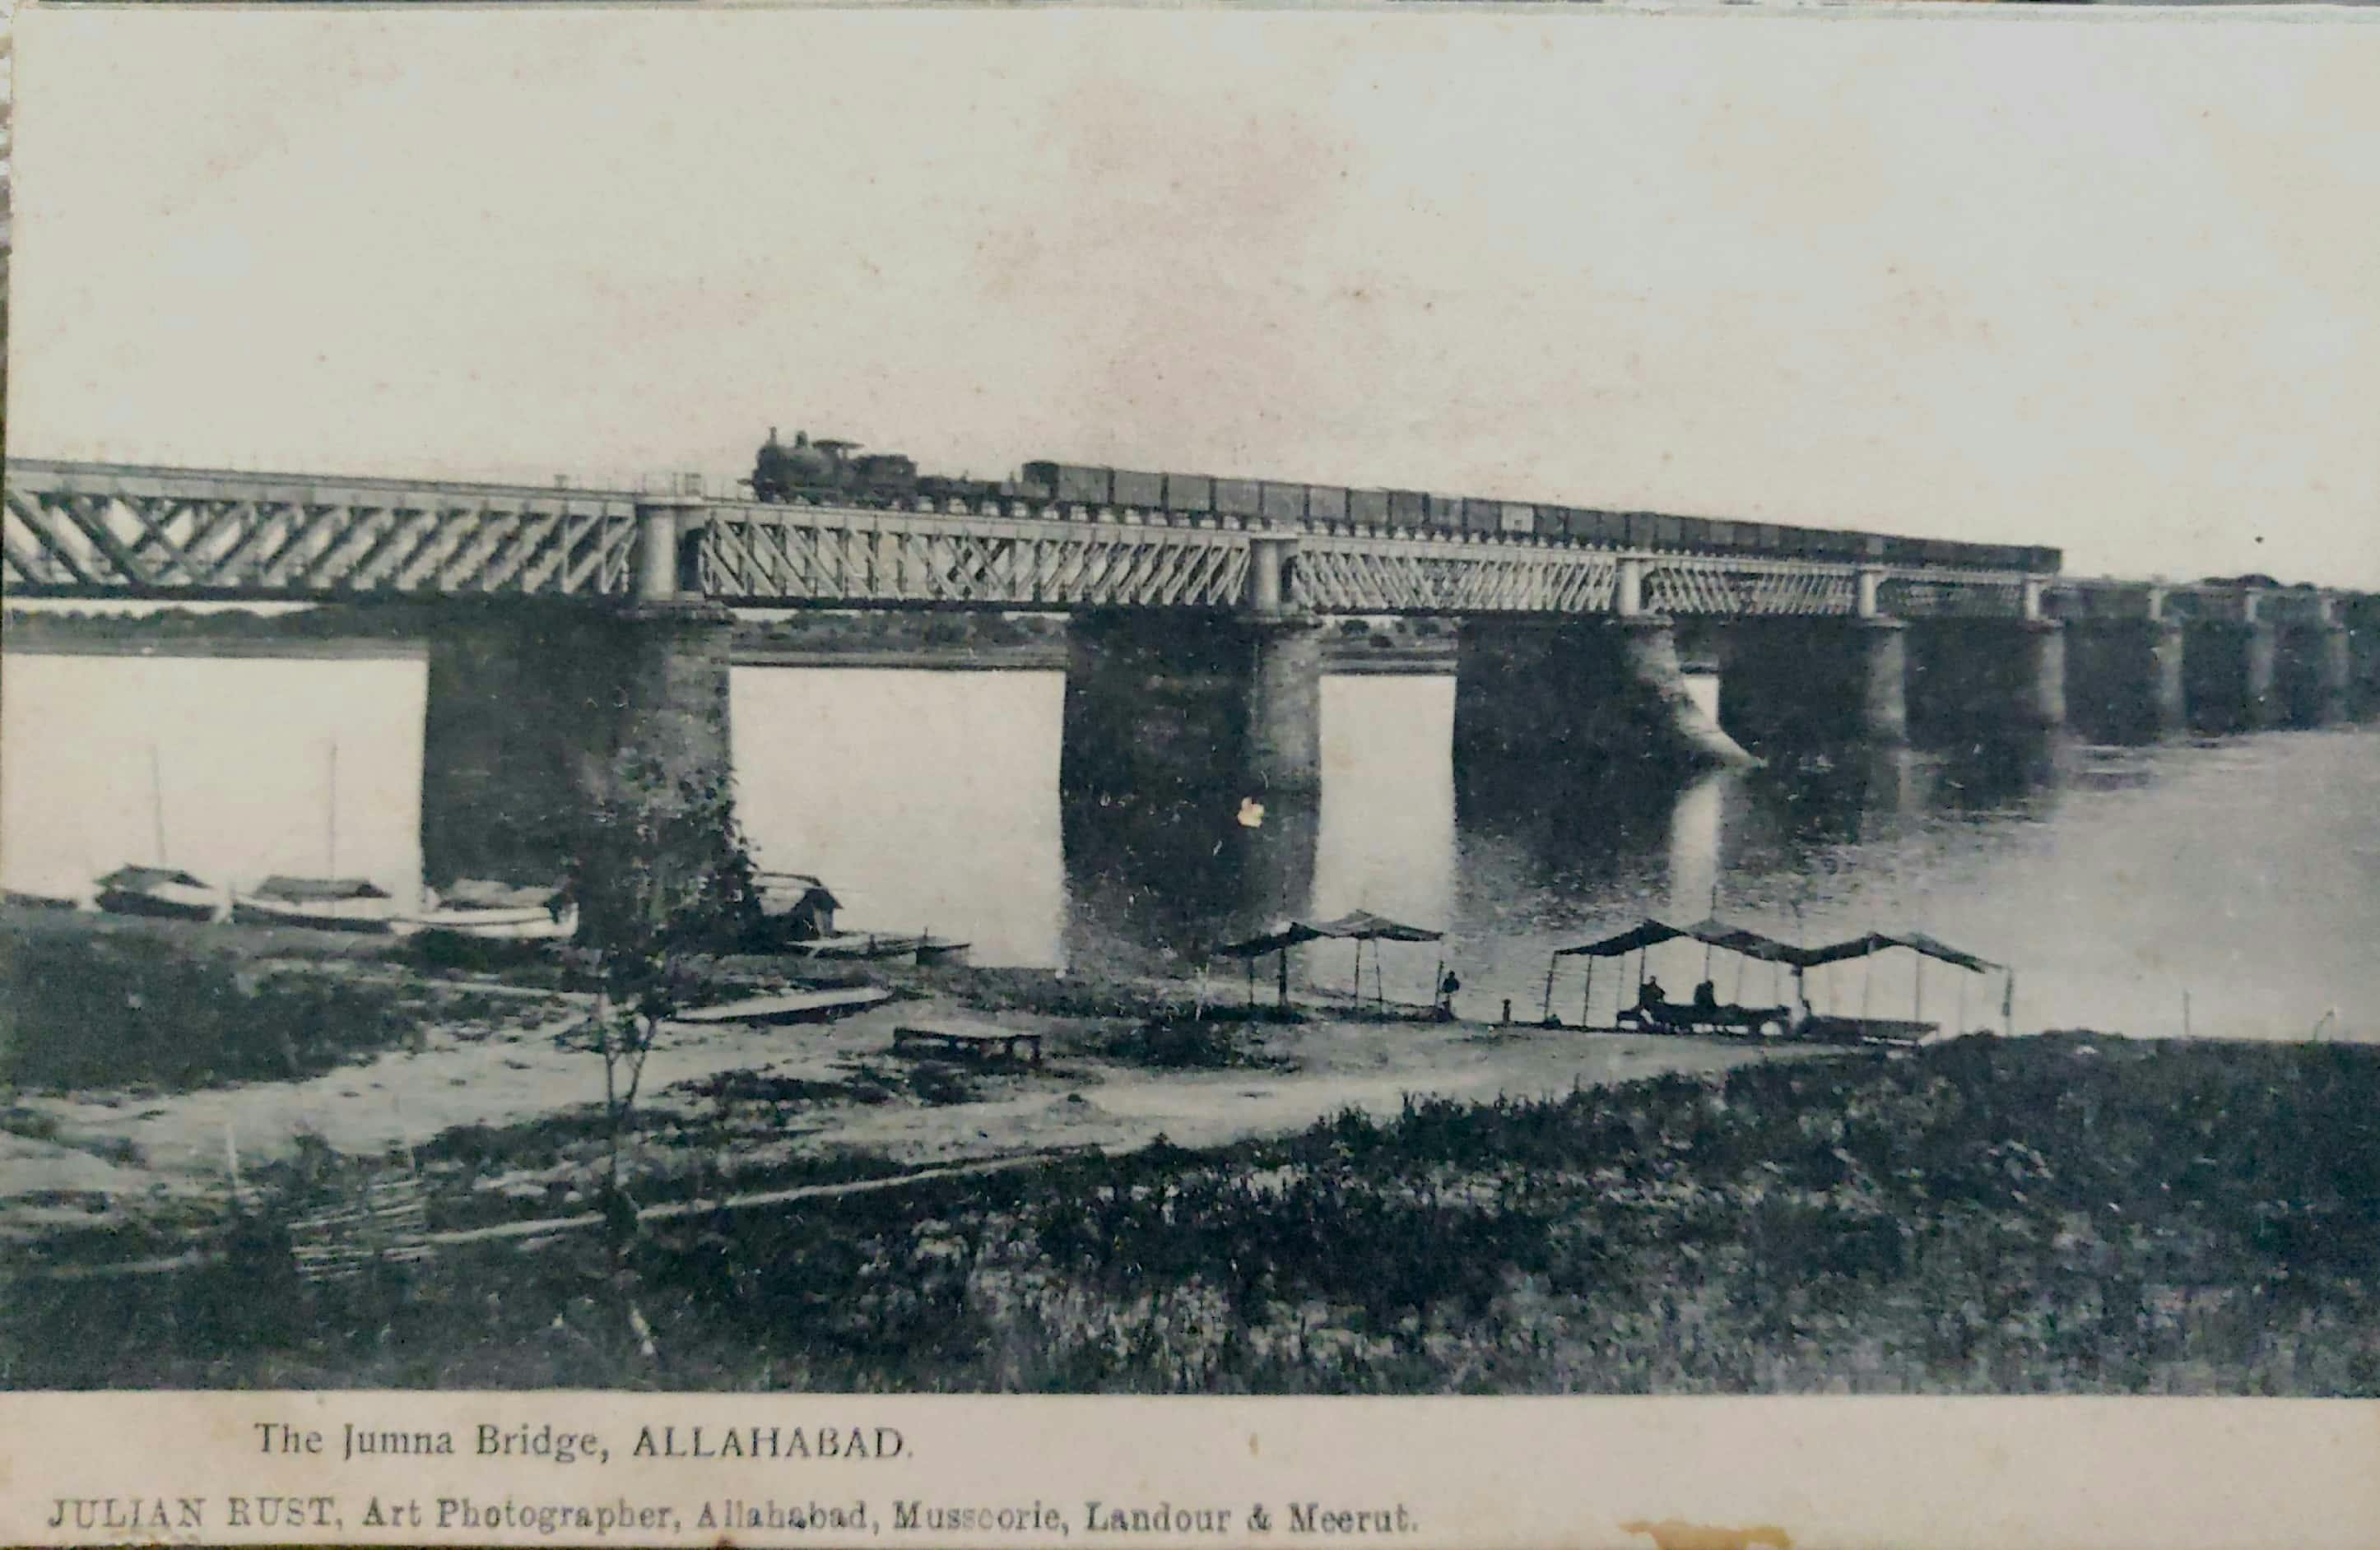 After the bridge was completed in 1865, postcard